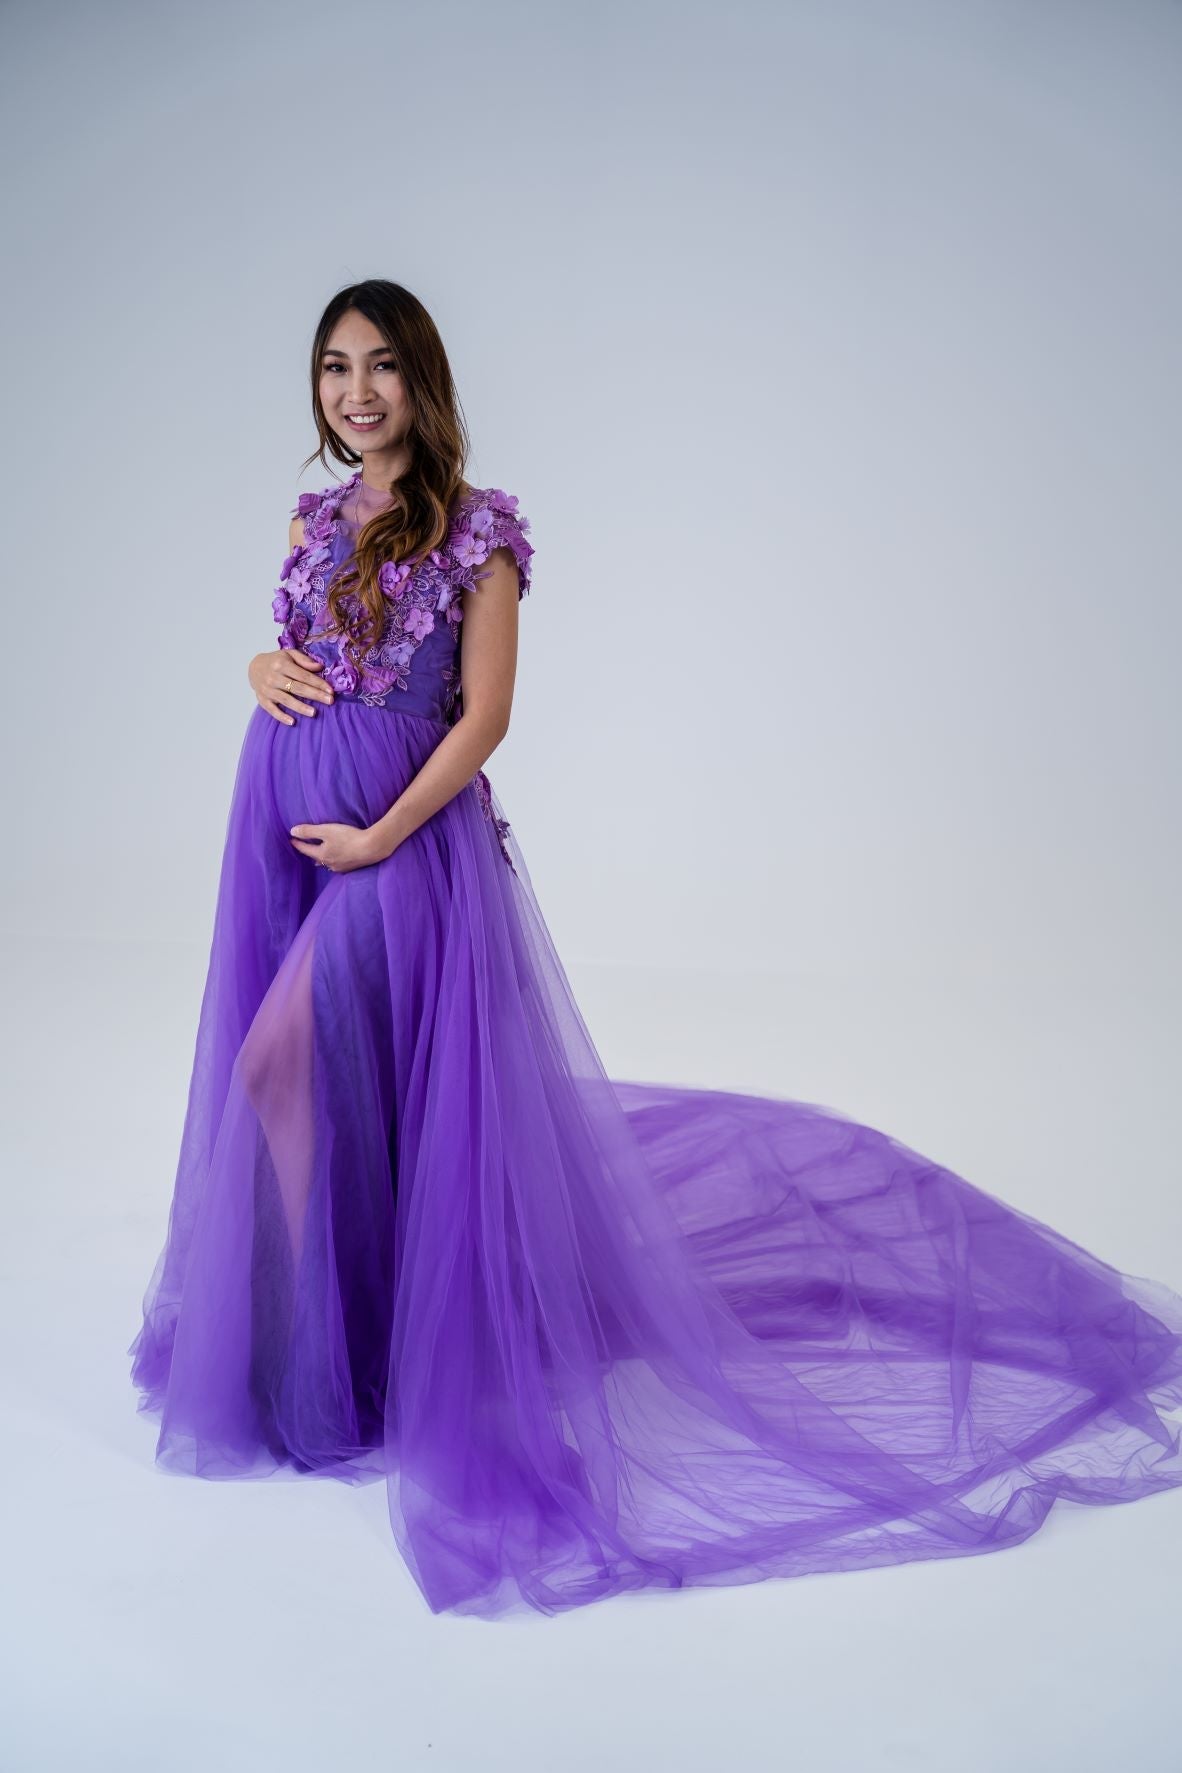 Maternity Photoshoot Dresses - Forrest - Purple Tulle Dress - 4 DAY RENTAL - Luxe Bumps AU